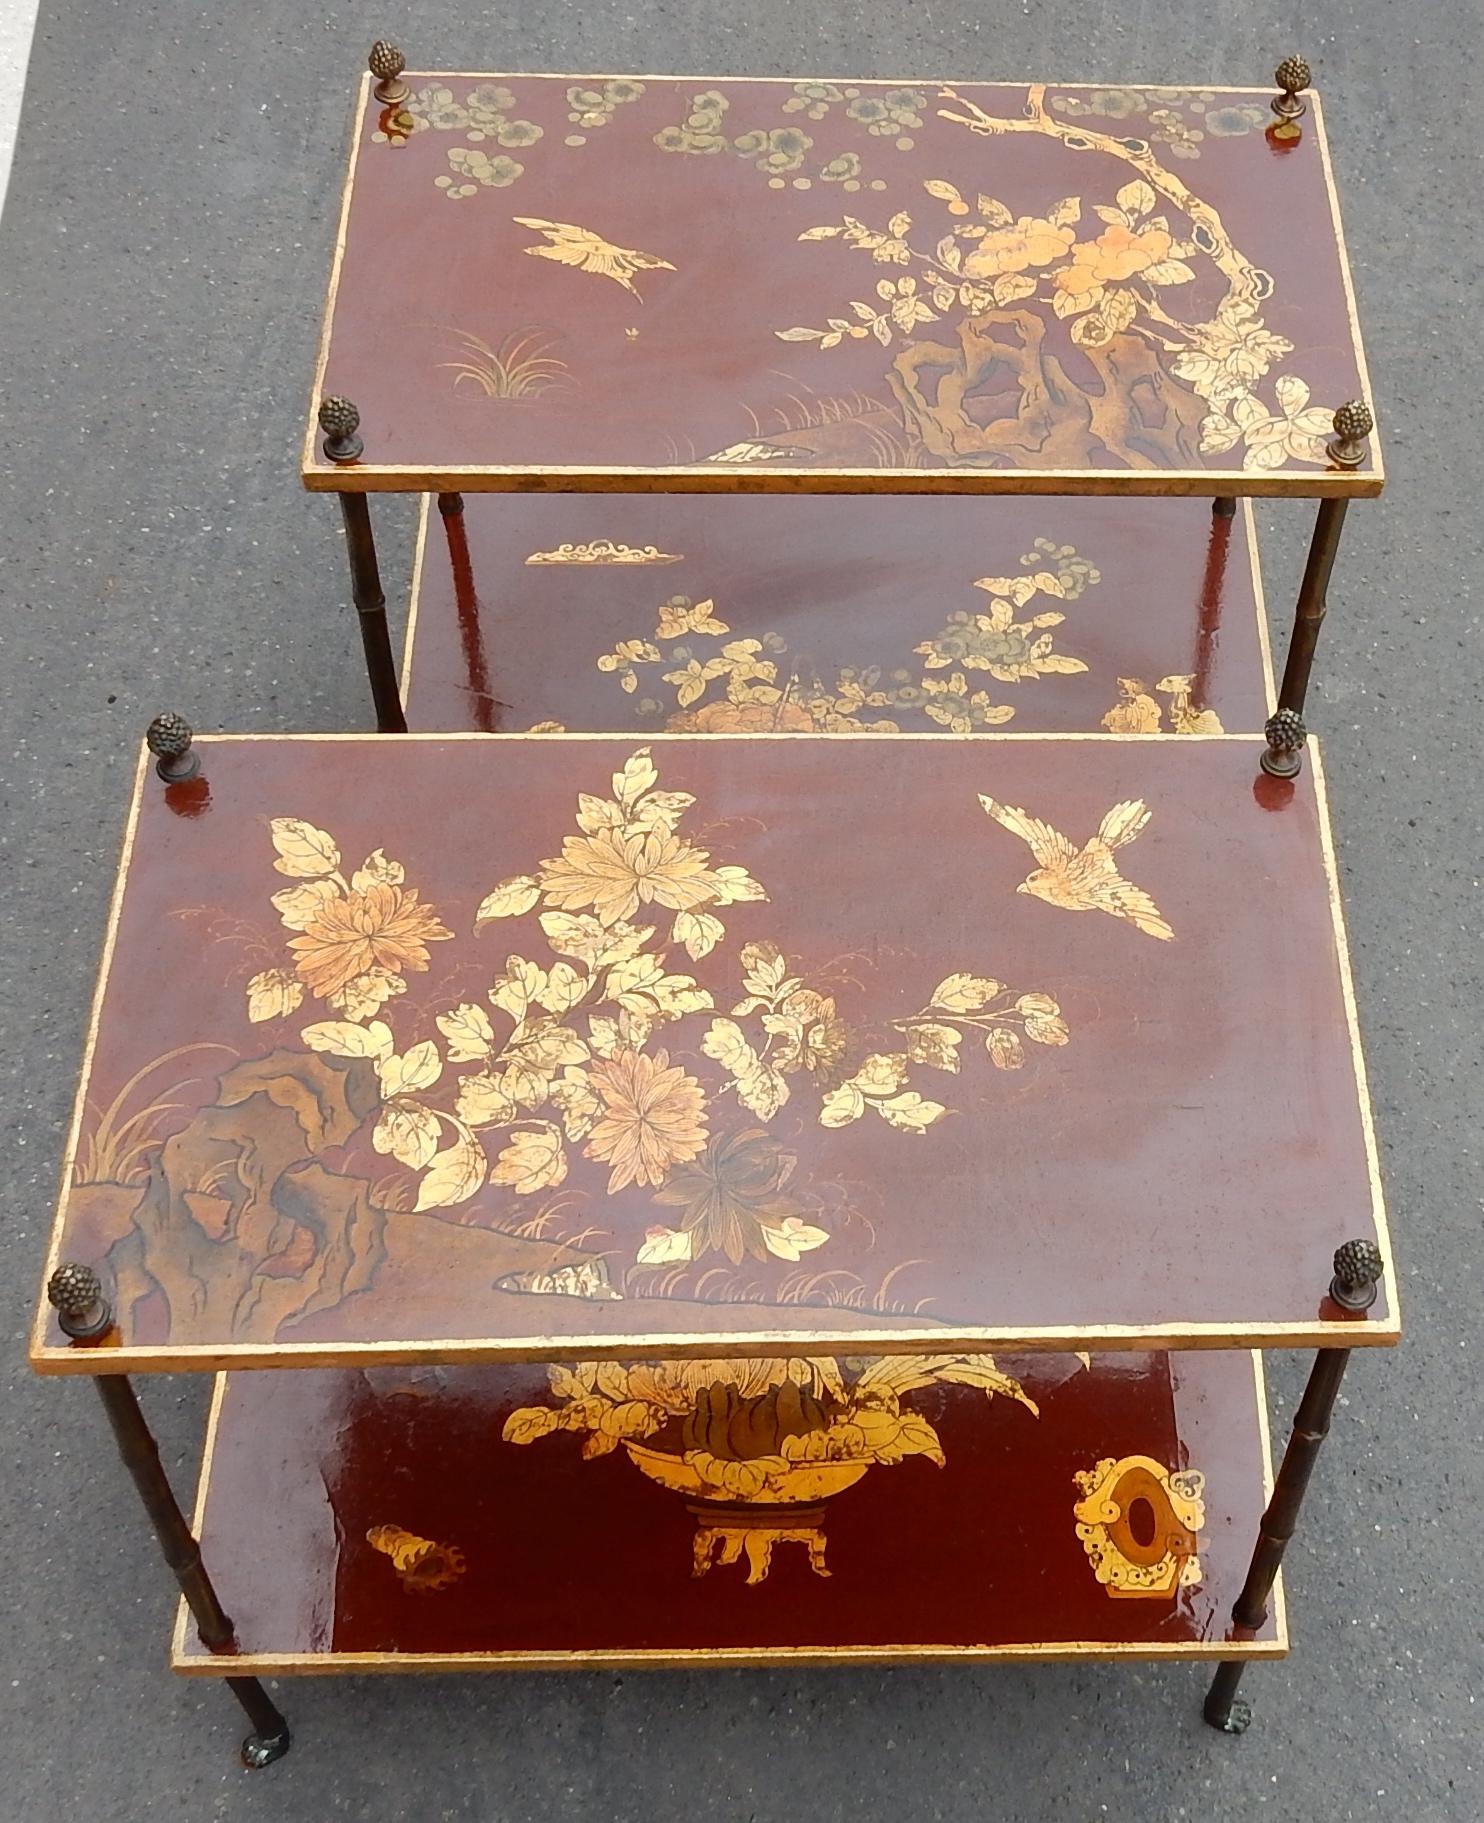 Pair of gilt bronze tables with bamboo decor claw feet with red and gold Chinese lacquer wooden trays with landscape decor, birds, flowers, pine cones at the end of the uprights
Circa 1950, condition of use
Everything is screwed, removable, easy